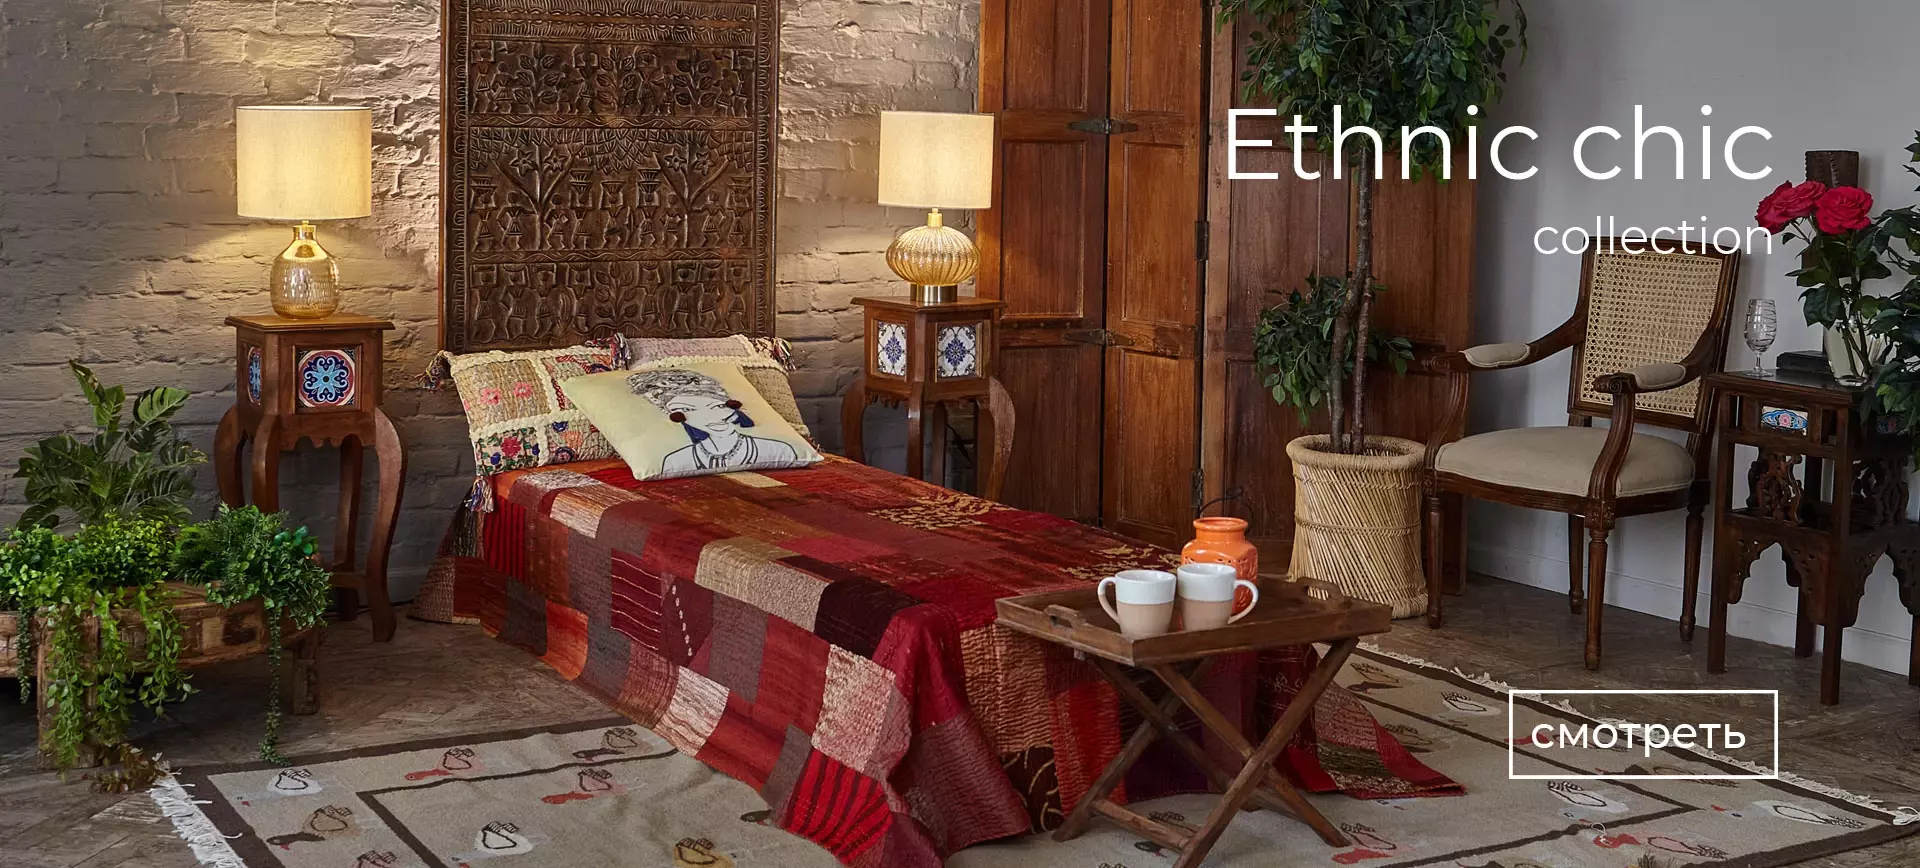 Ethnic chic collection